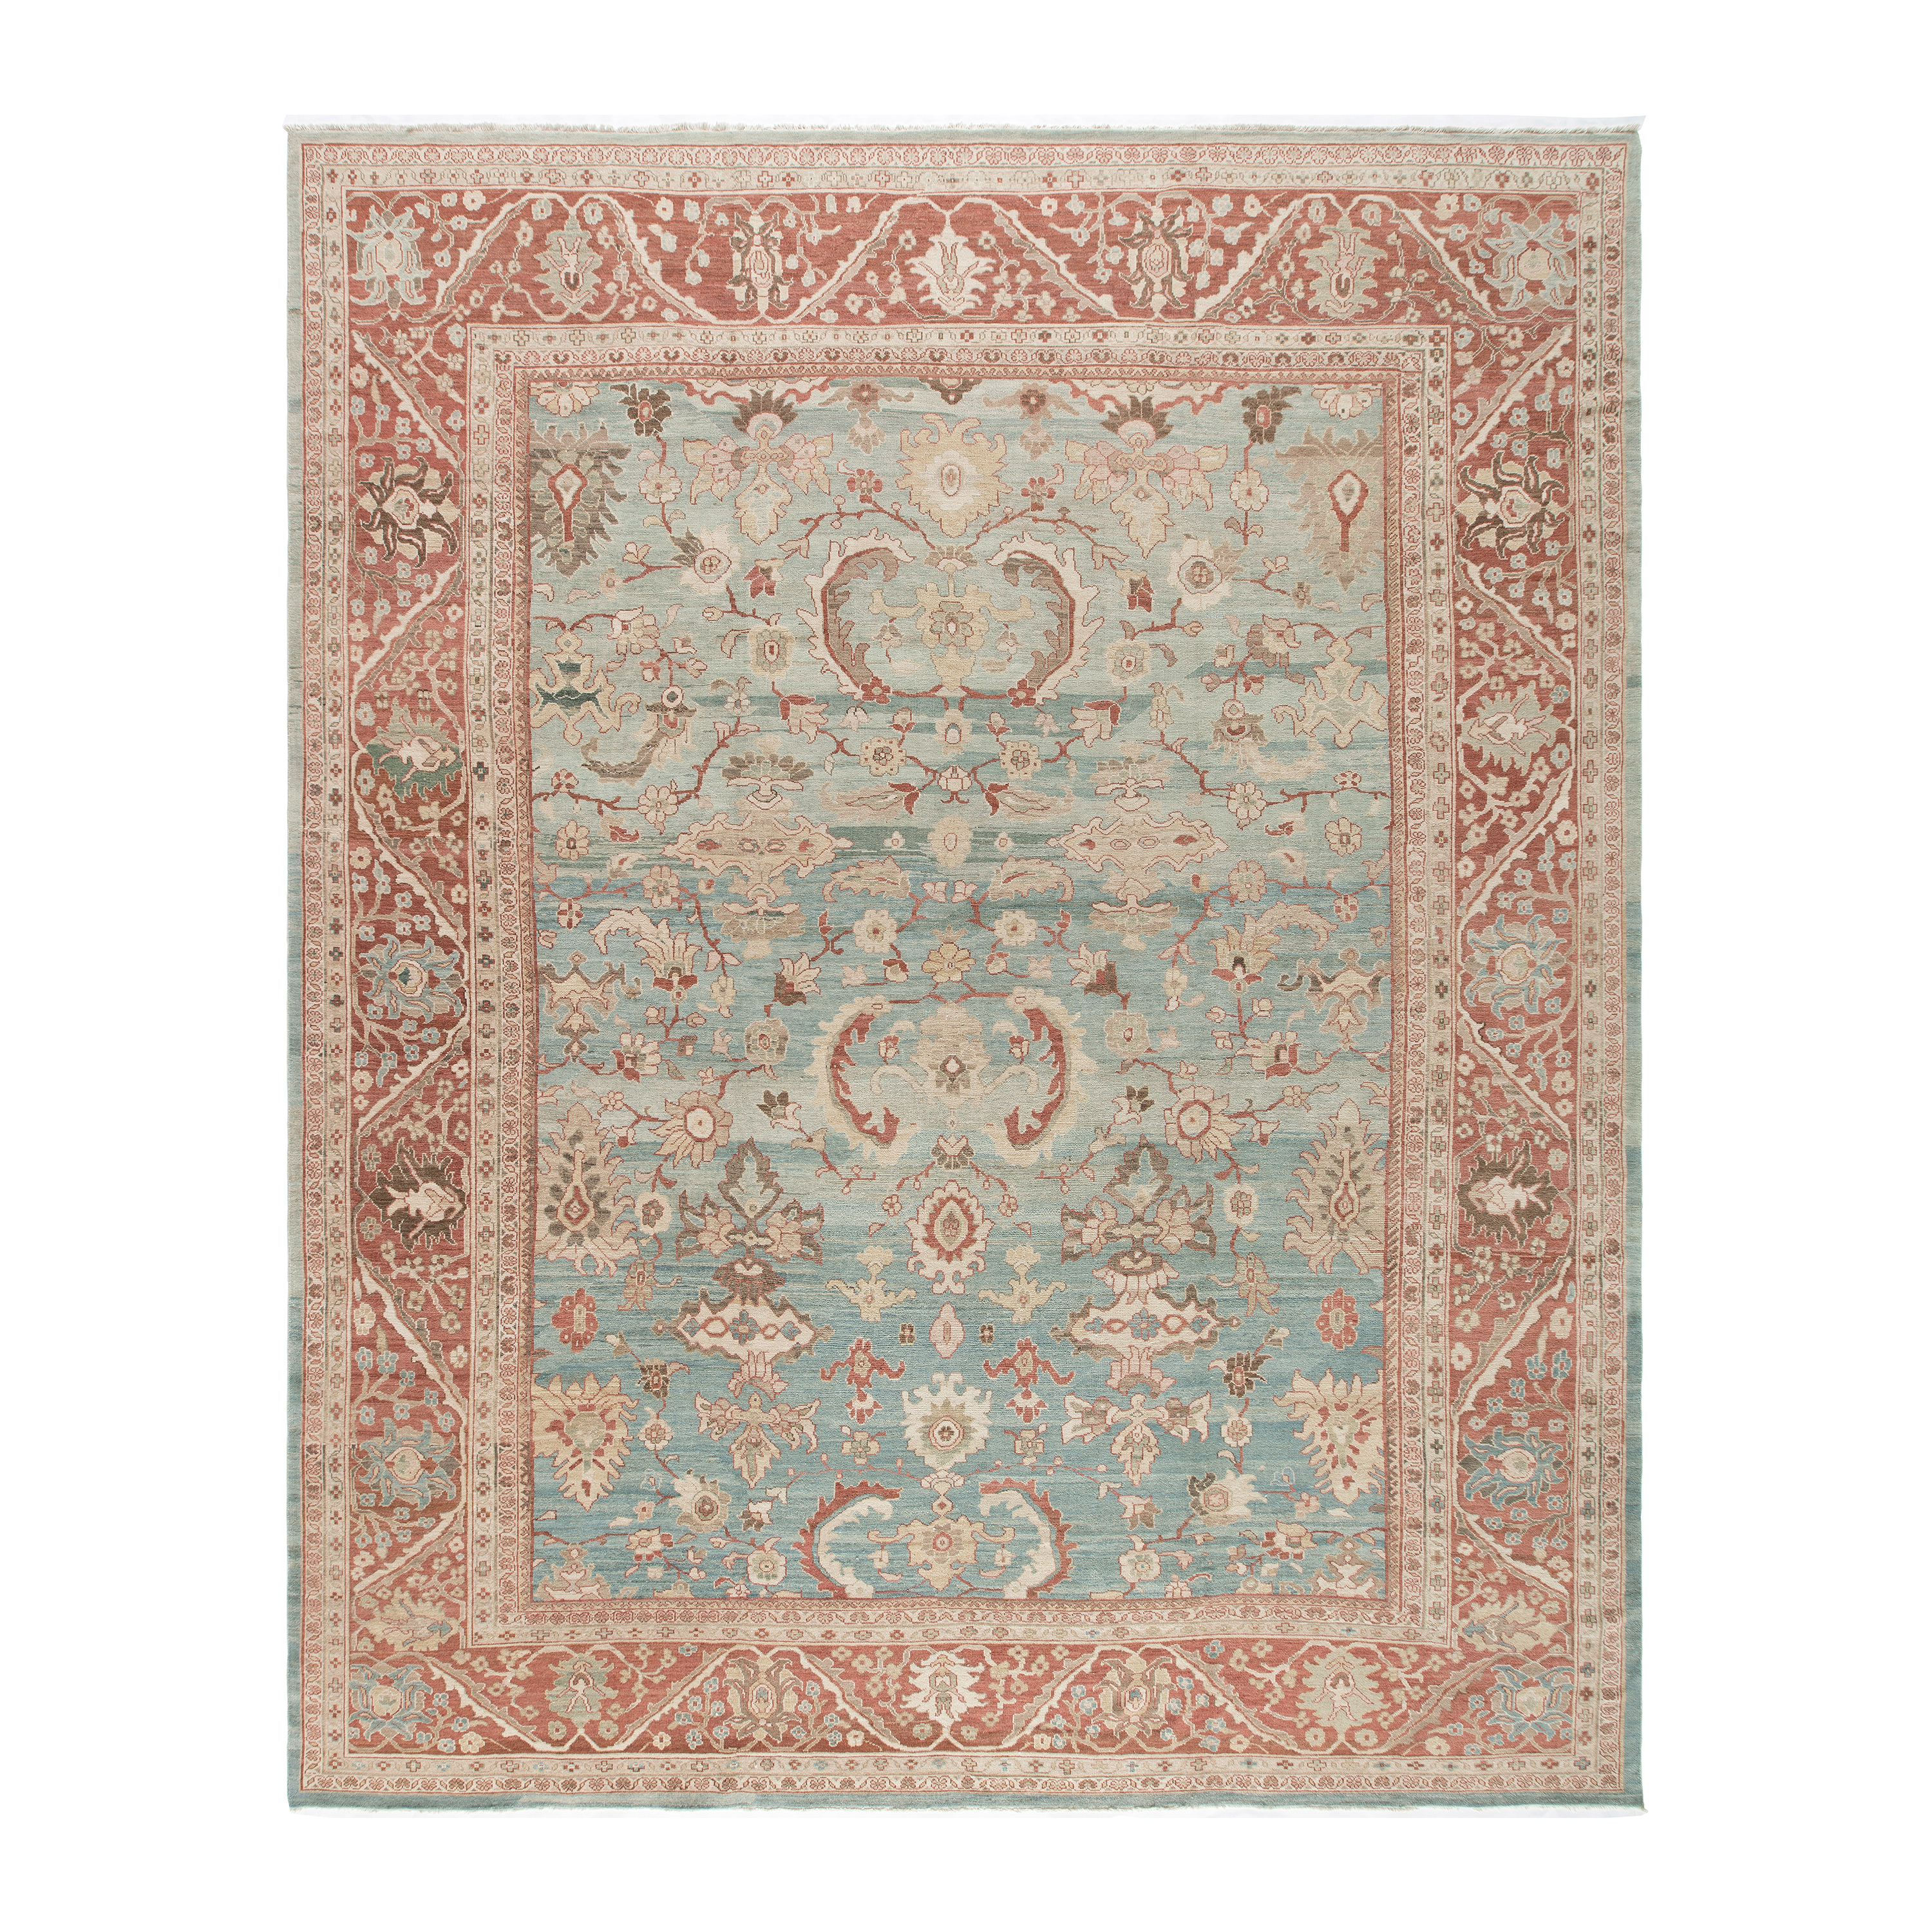 Ziegler Sultanabad is hand-knotted and made of 100% wool.